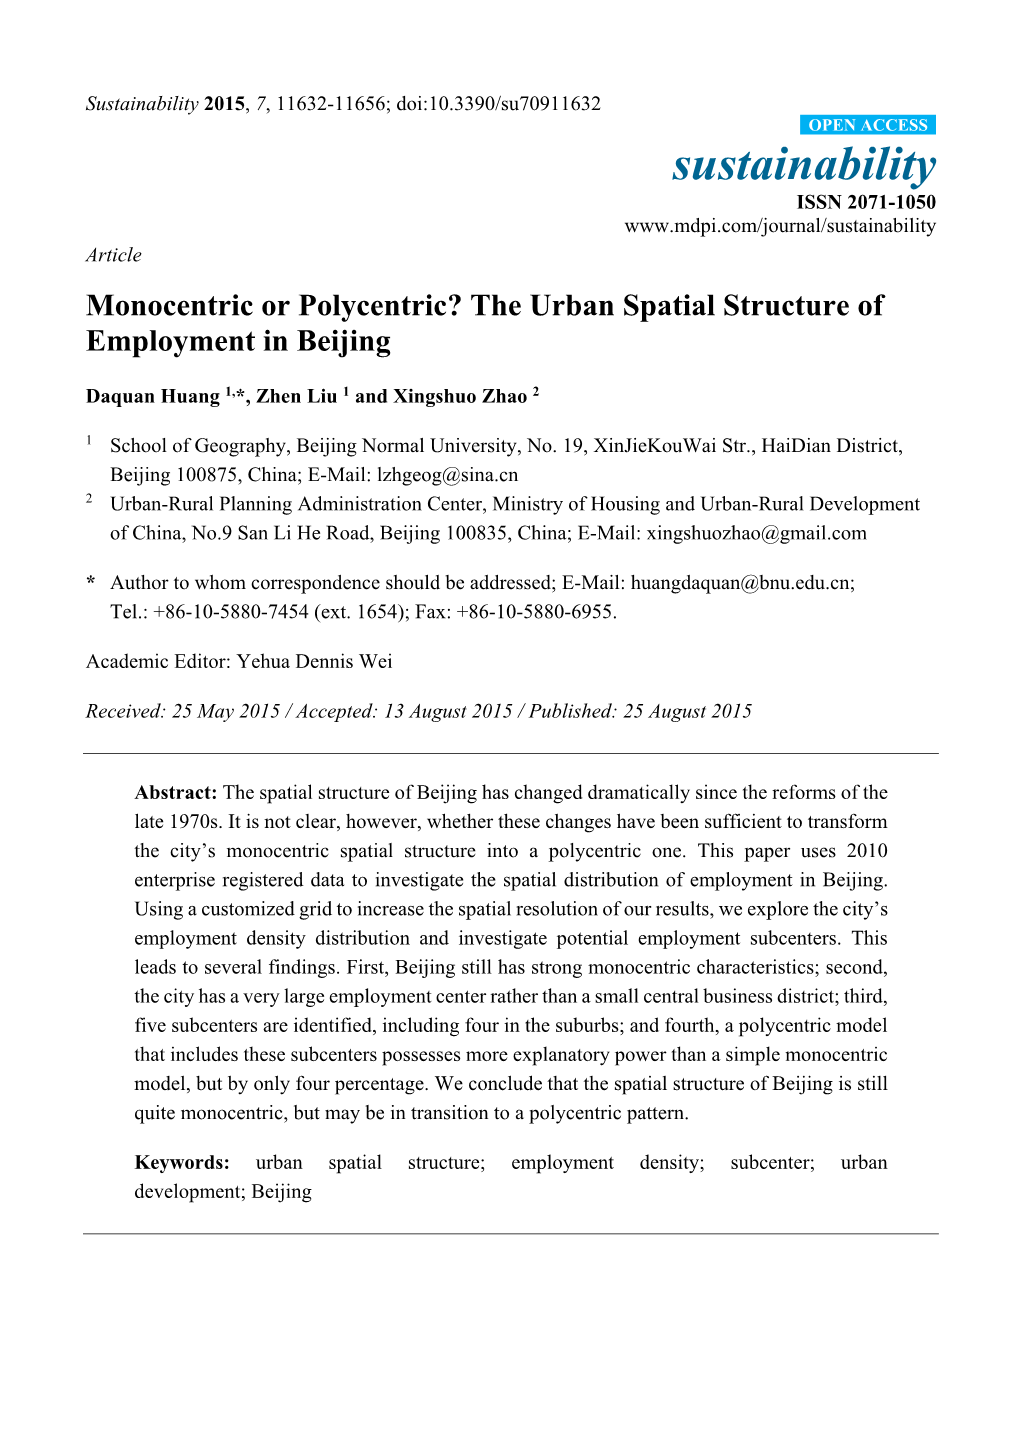 Monocentric Or Polycentric? the Urban Spatial Structure of Employment in Beijing